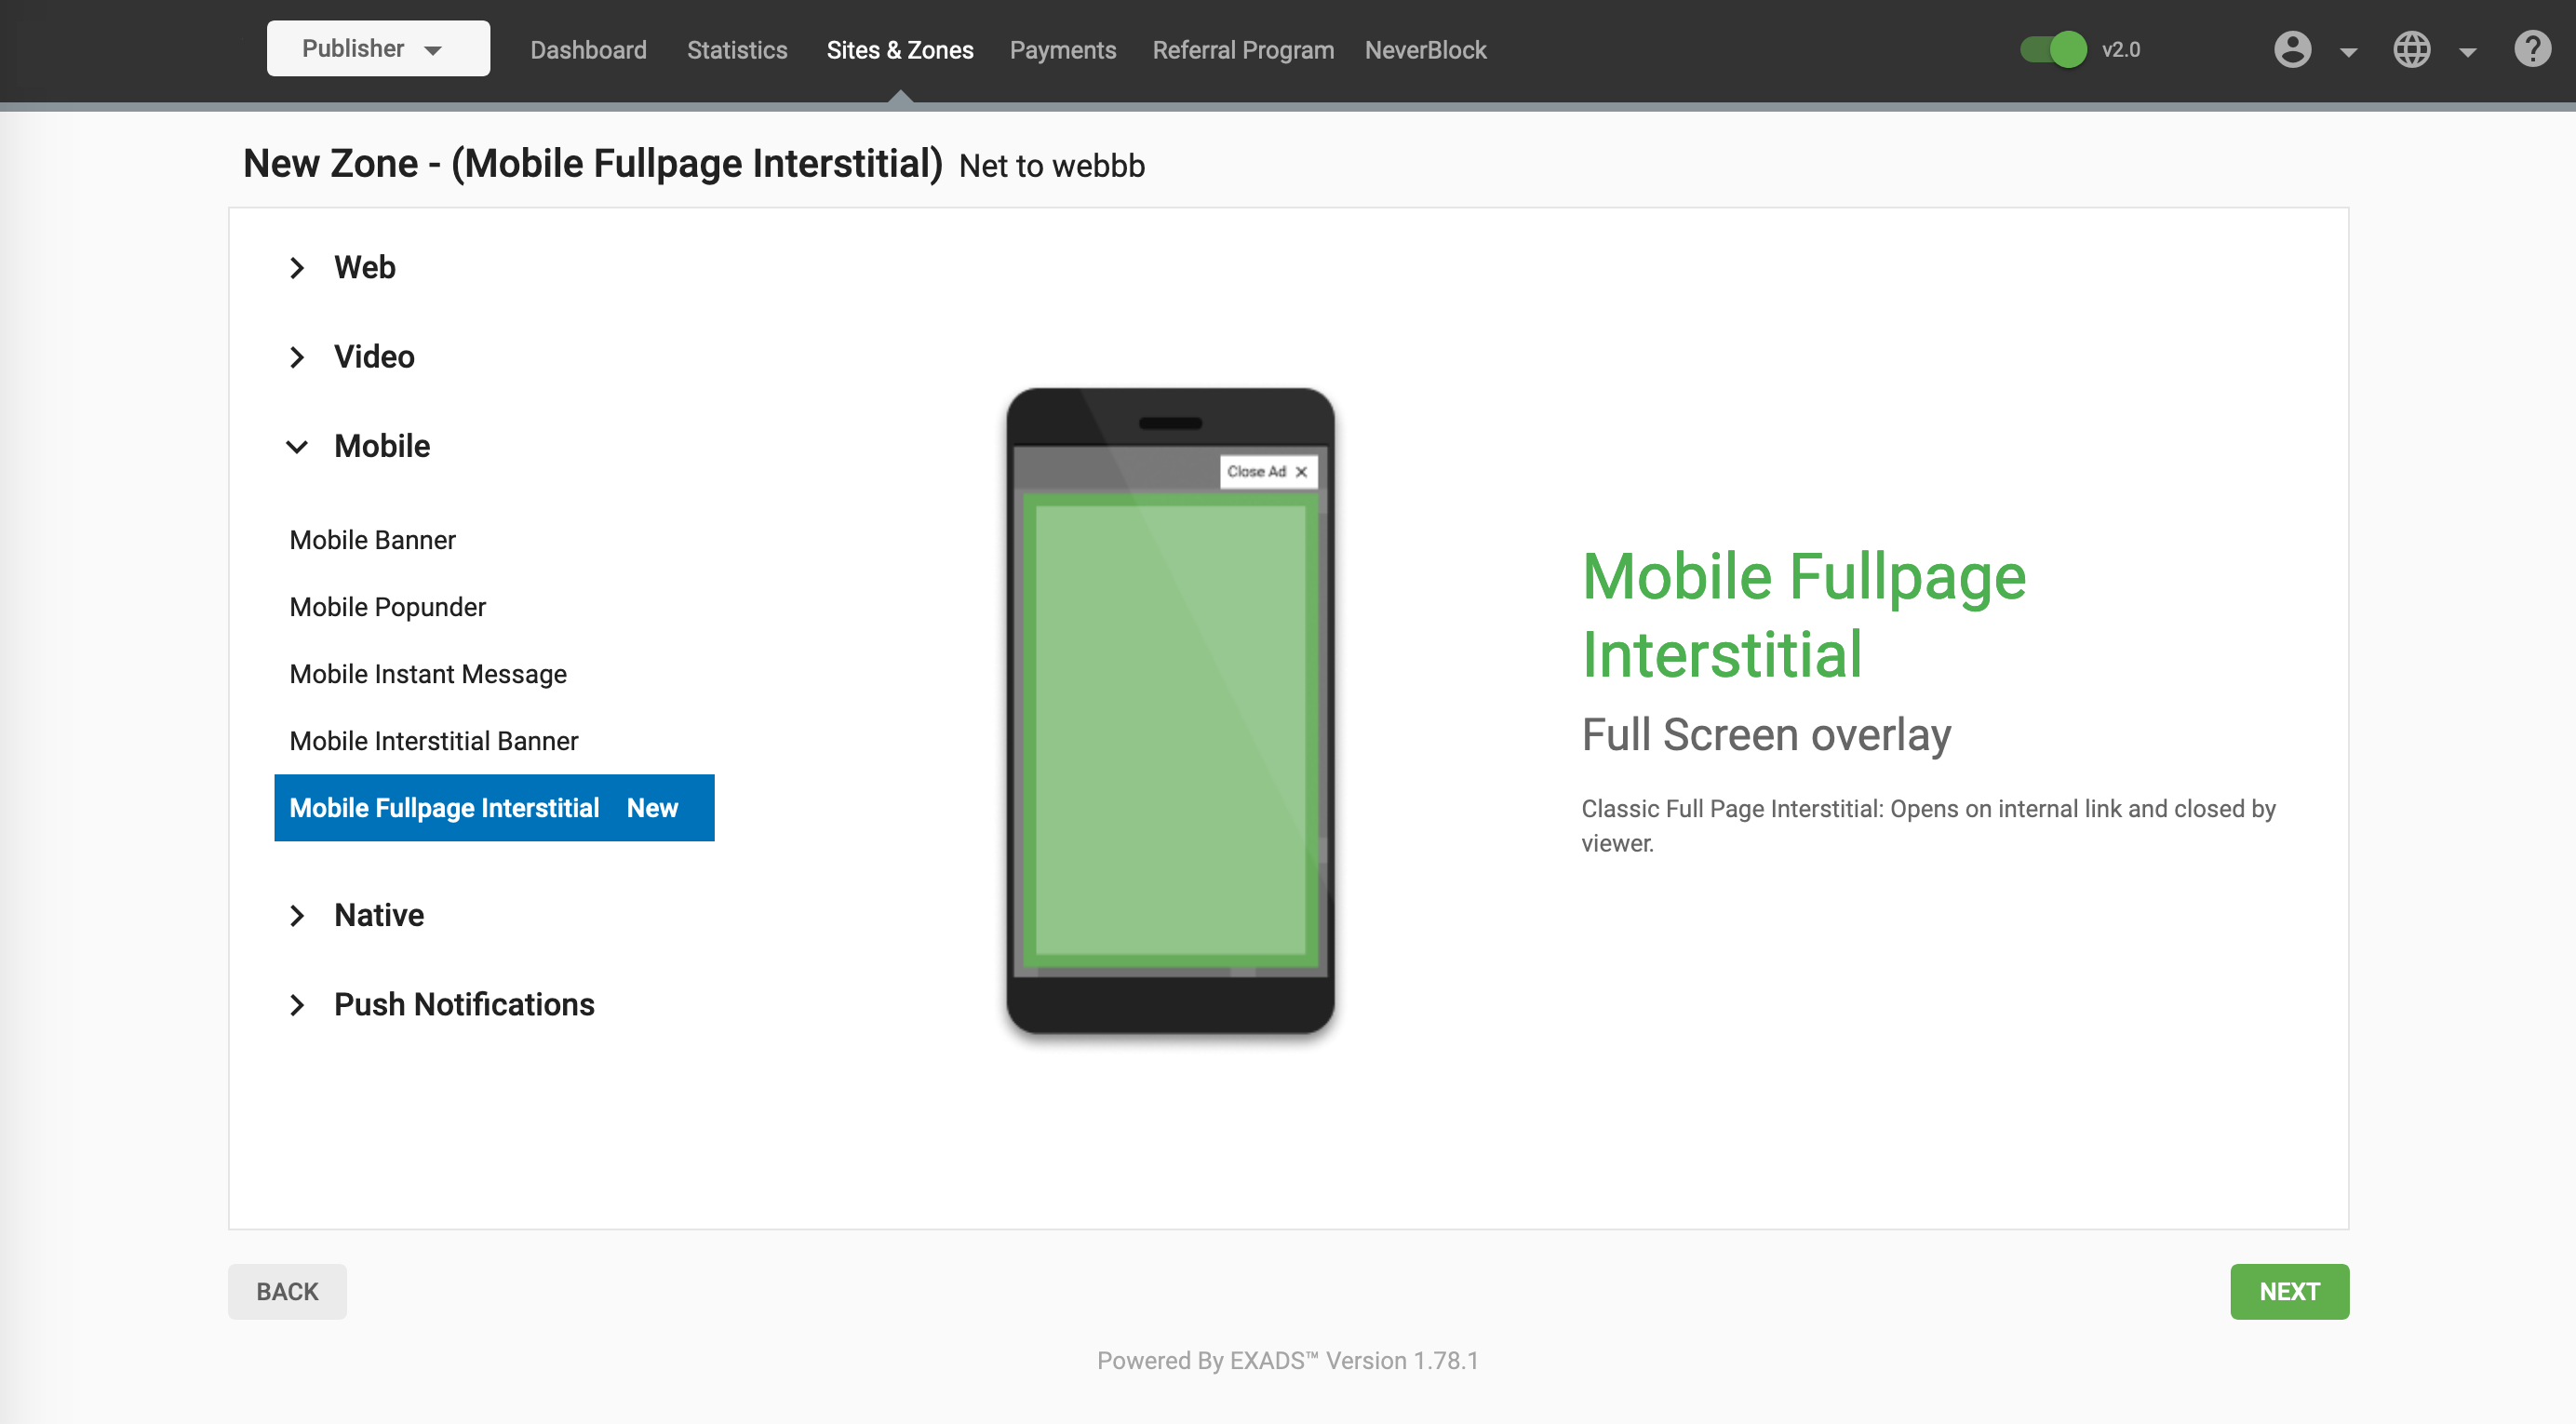 Mobile Fullpage Interstitial